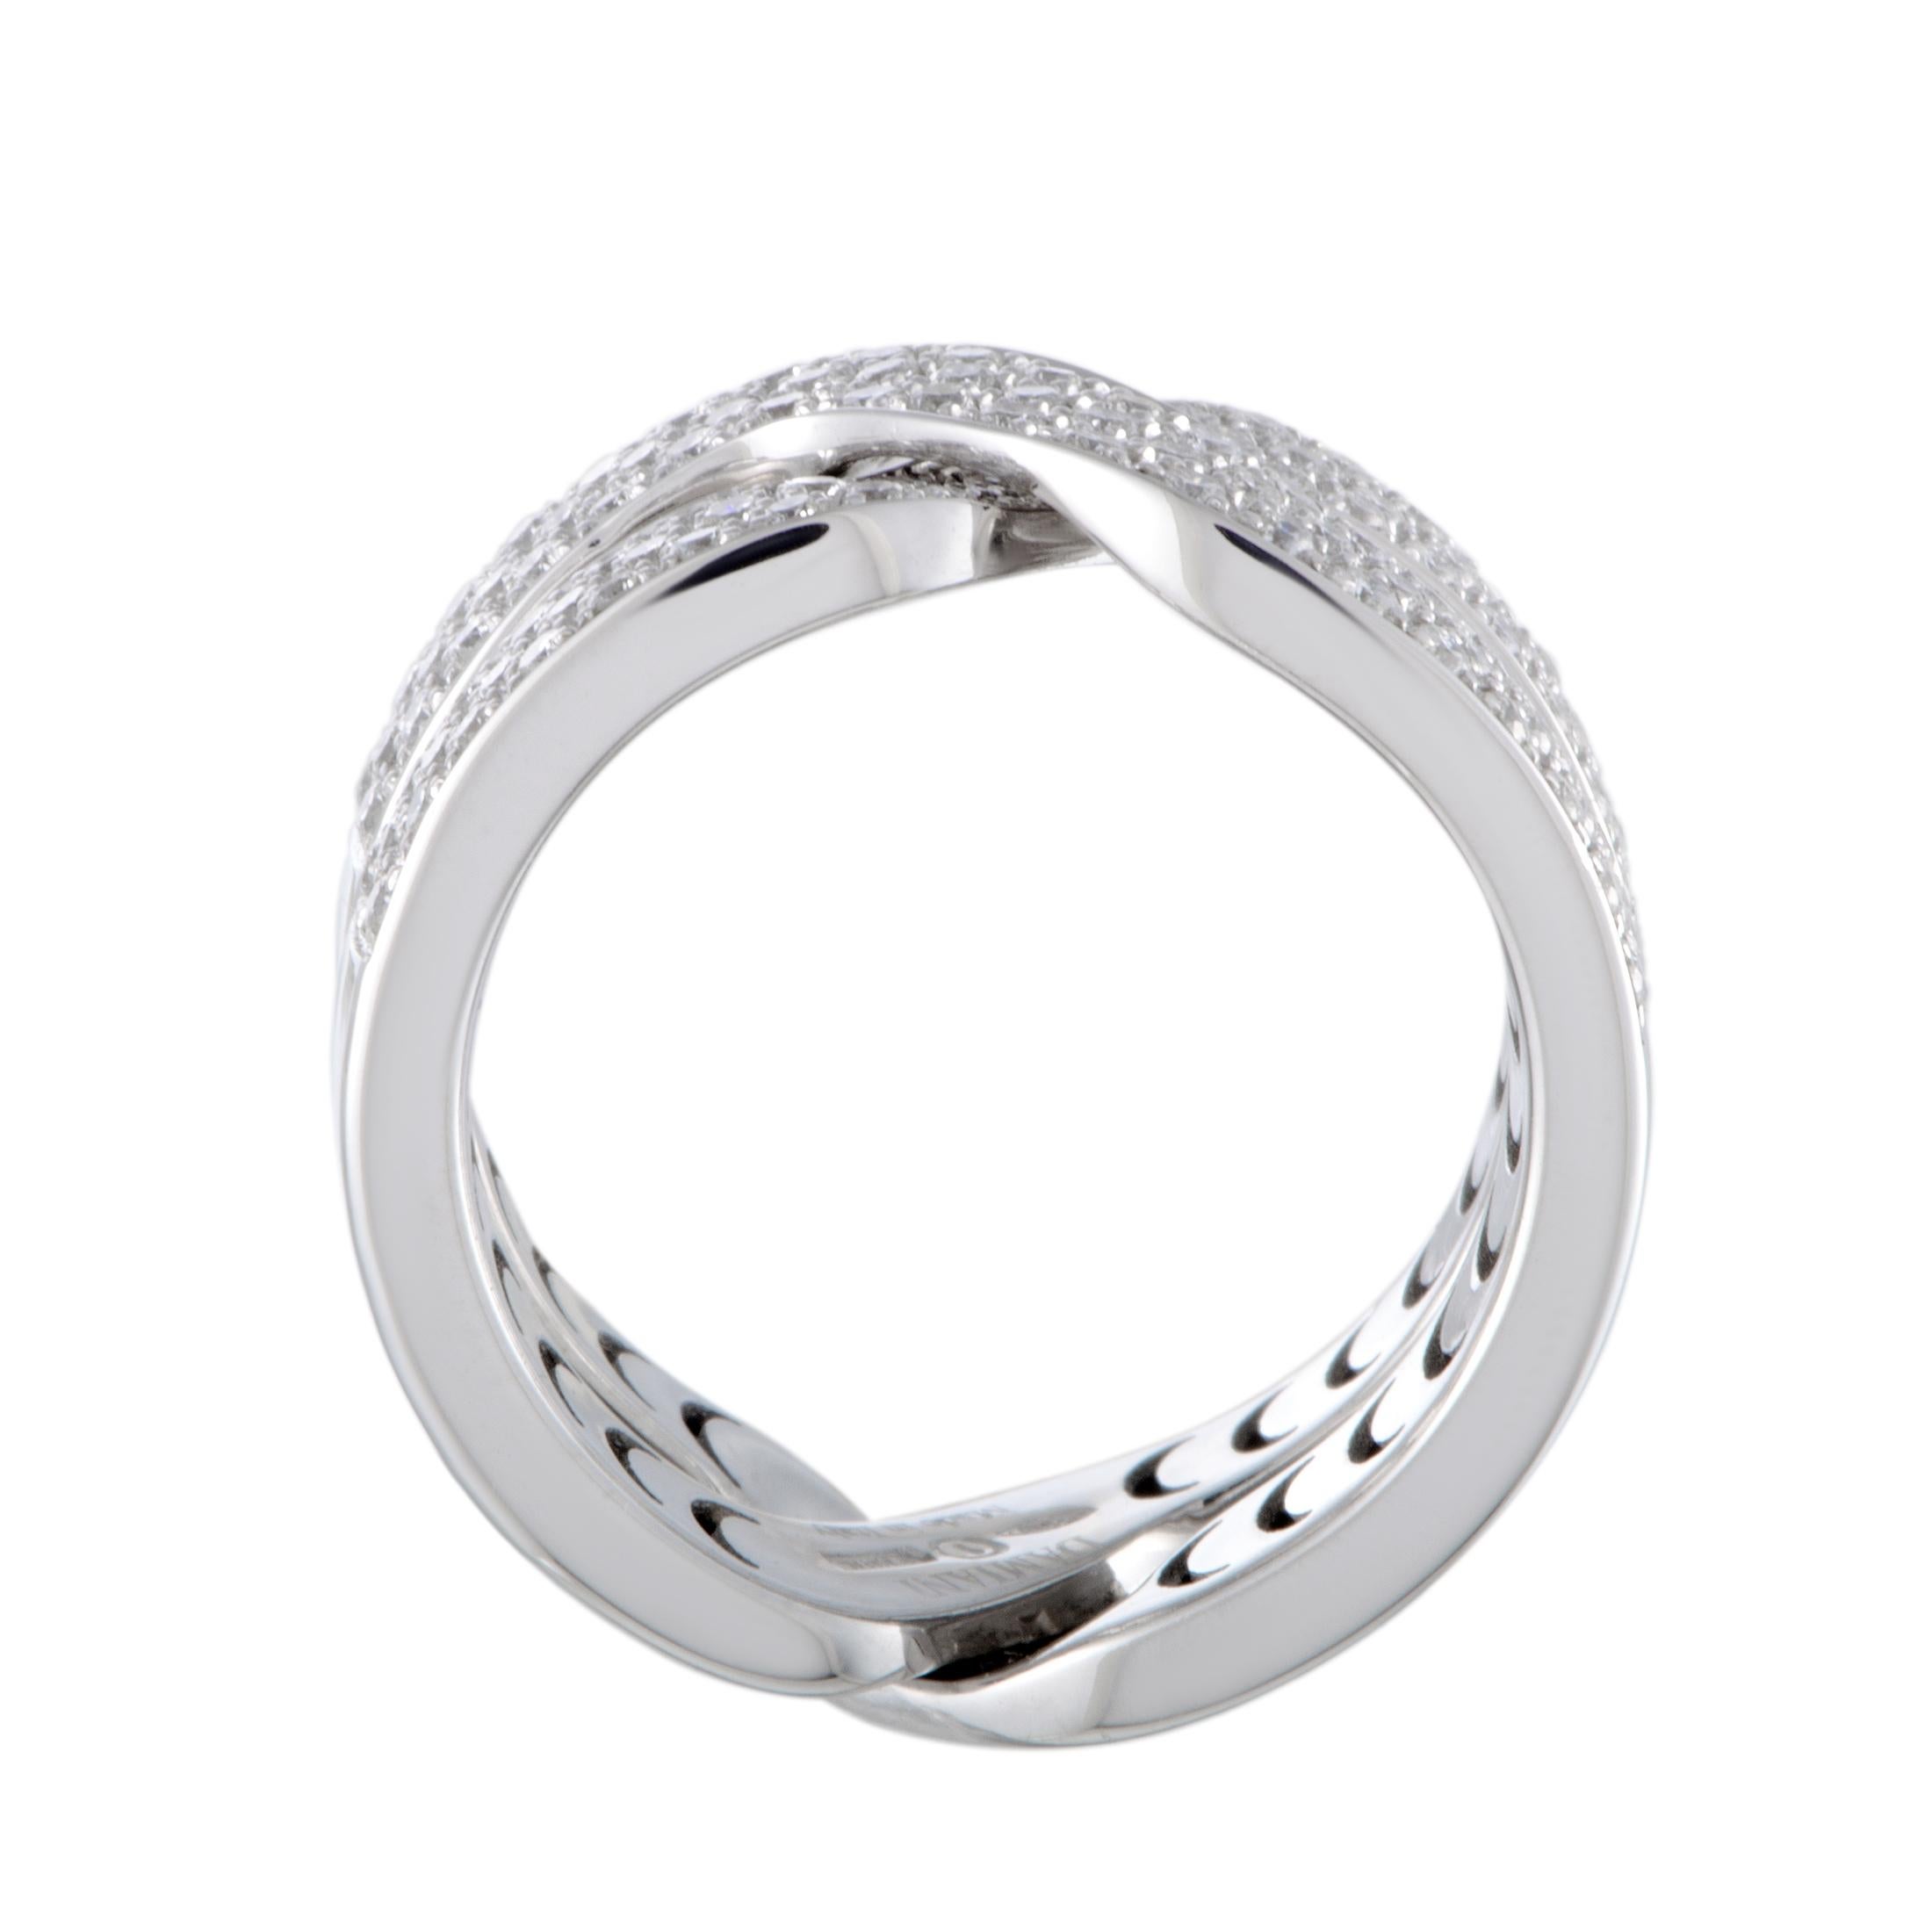 If you wish to elevate your style in a wonderfully prestigious yet distinctly luxurious fashion then this extraordinary jewelry piece is an excellent choice. Splendidly designed by Damiani, the ring is exquisitely crafted from elegant 18K white gold